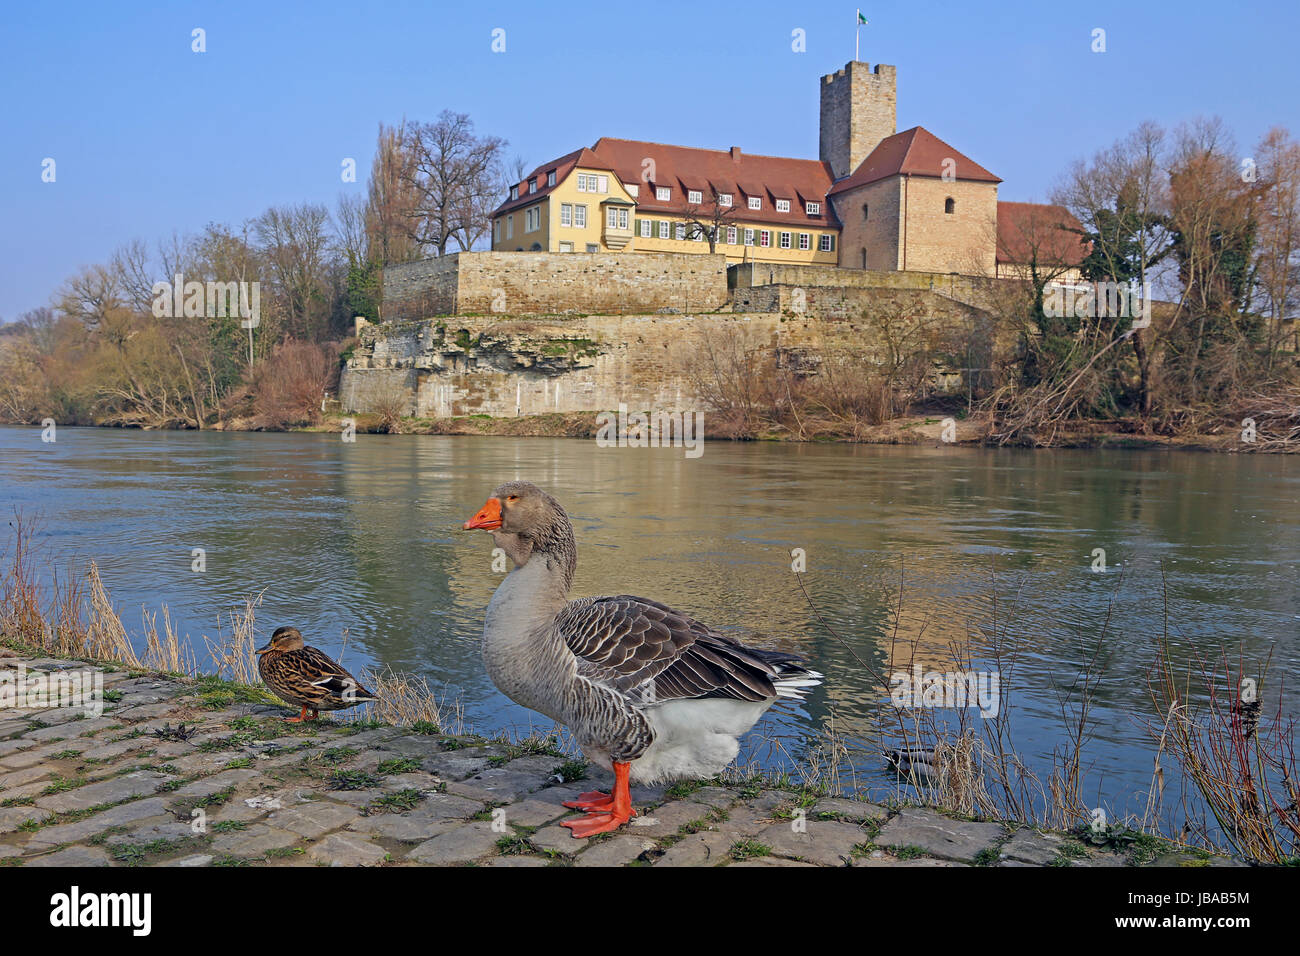 goose am neckar before the old castle in lauffen Stock Photo